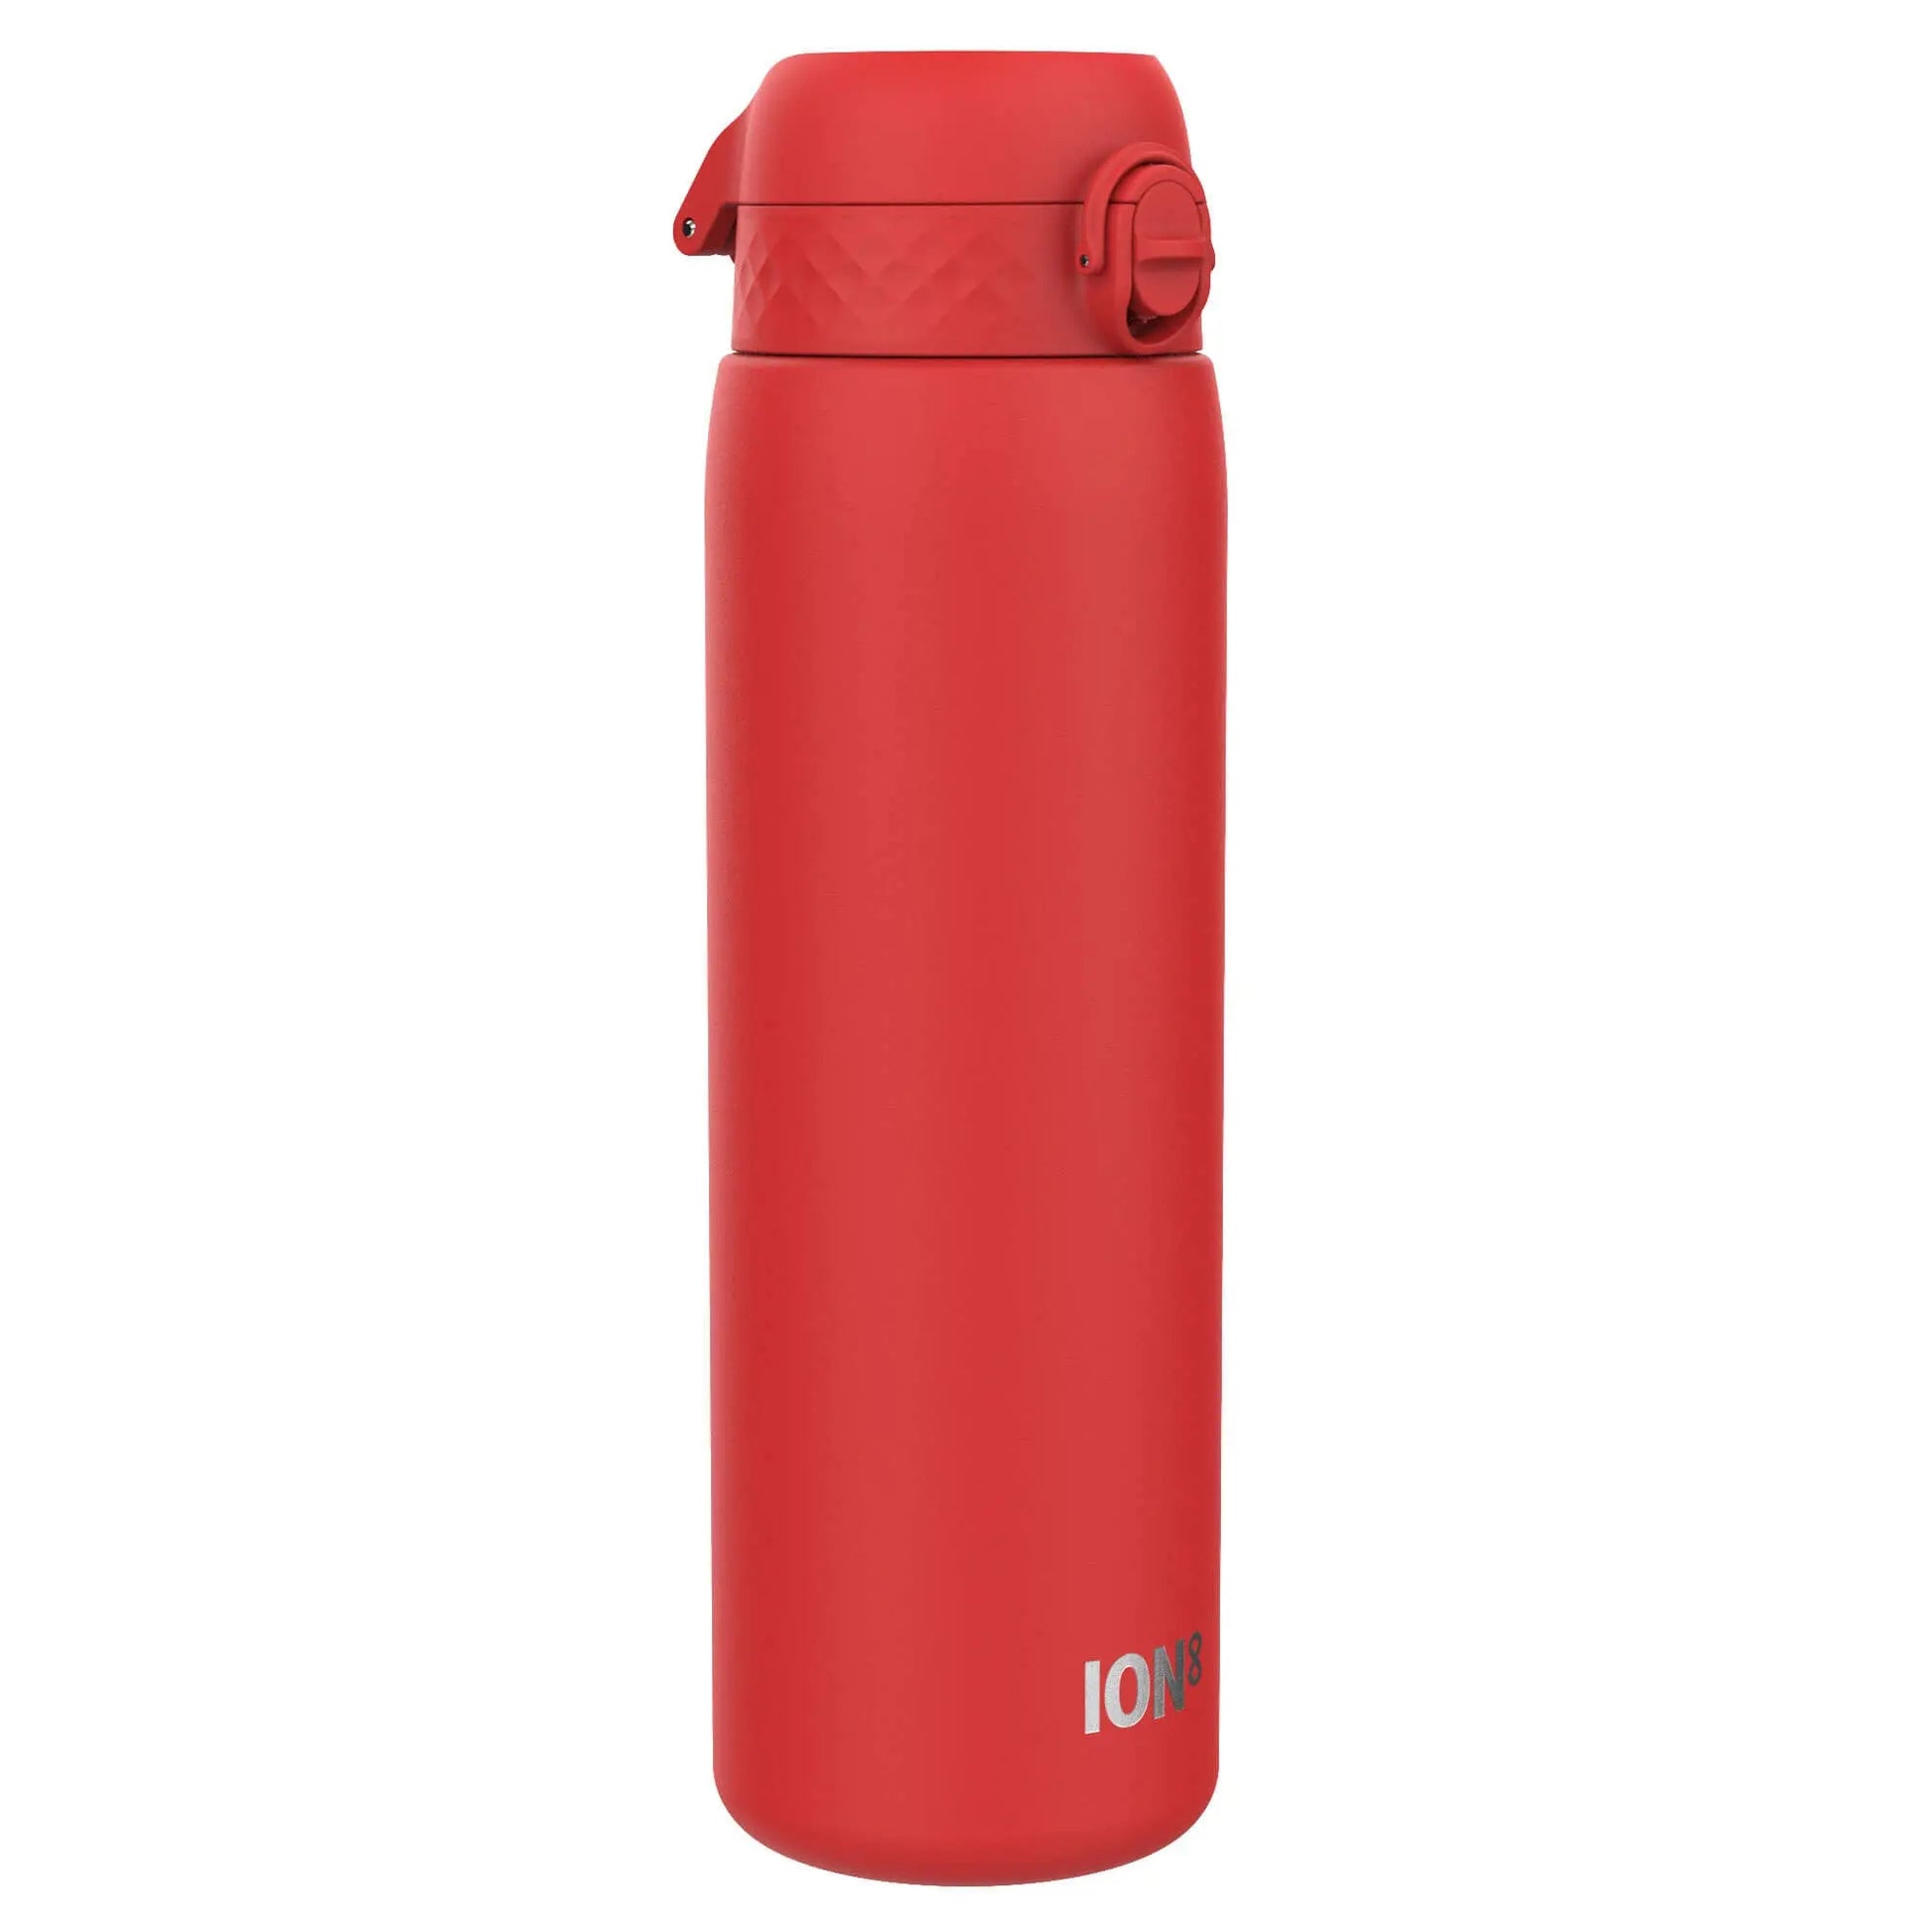 Leak Proof 1 Litre Water Bottle, Stainless Steel, Red, 1L - ION8